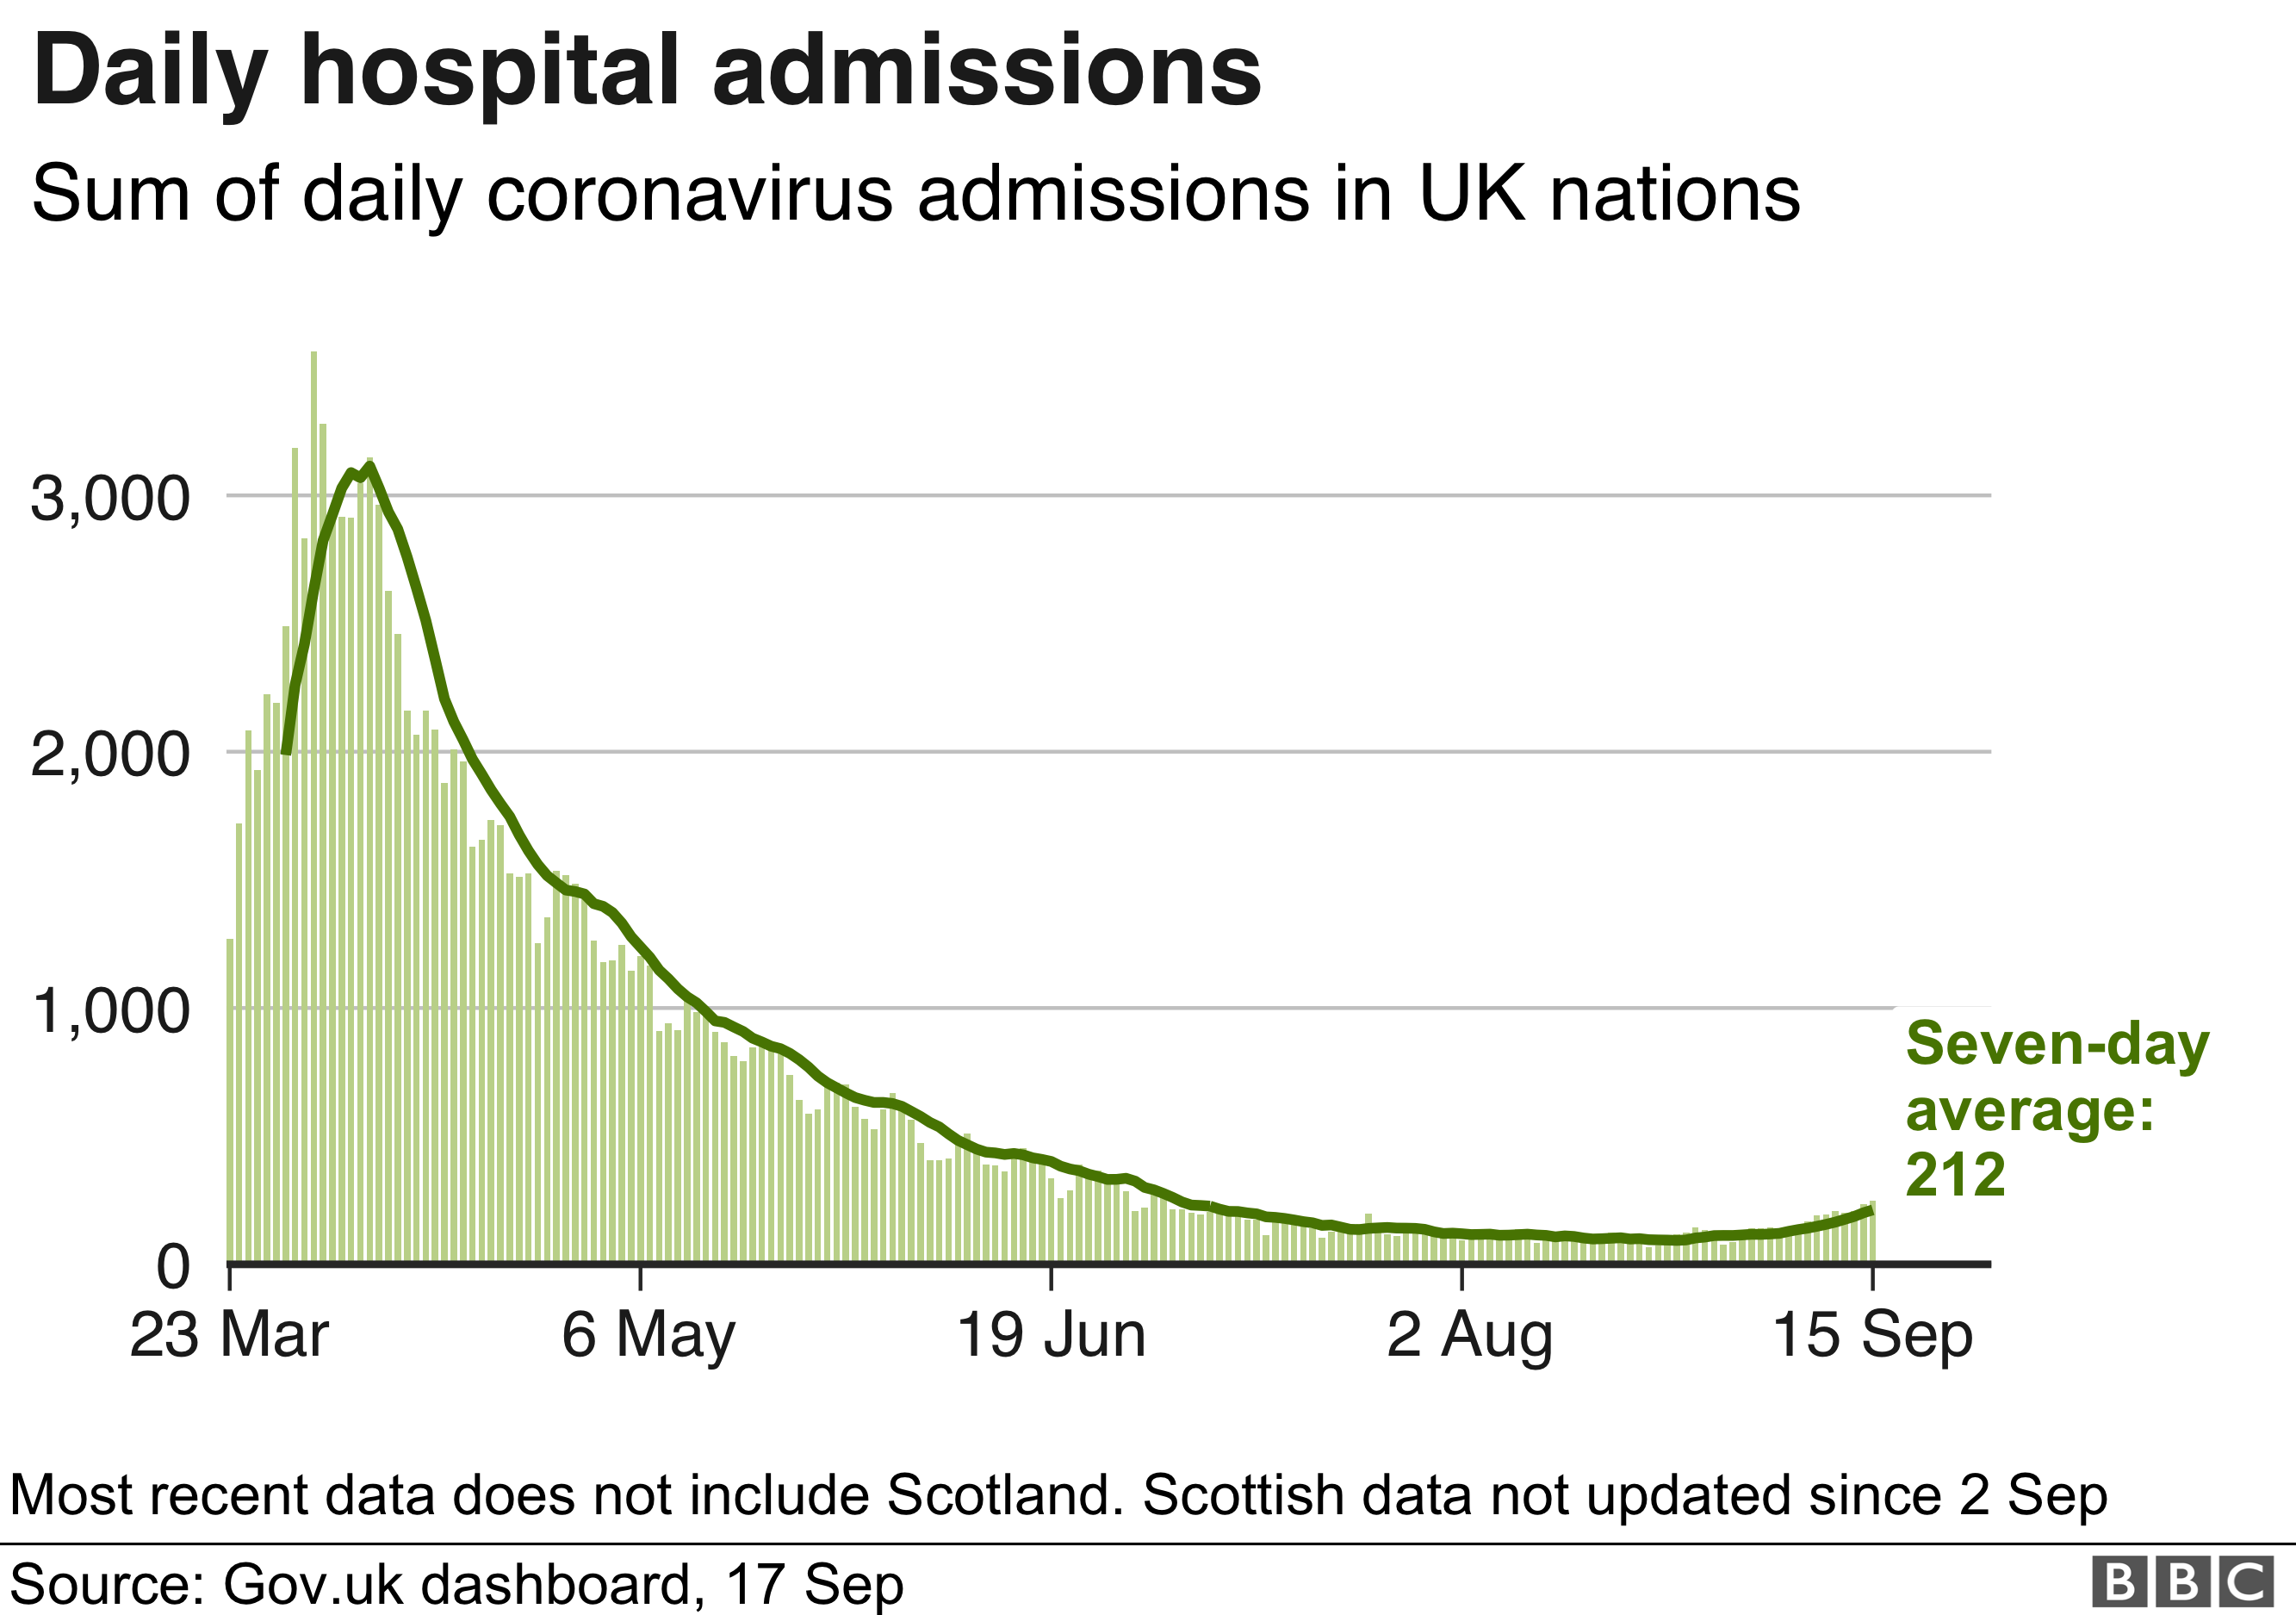 Graph showing hospital admissions in UK